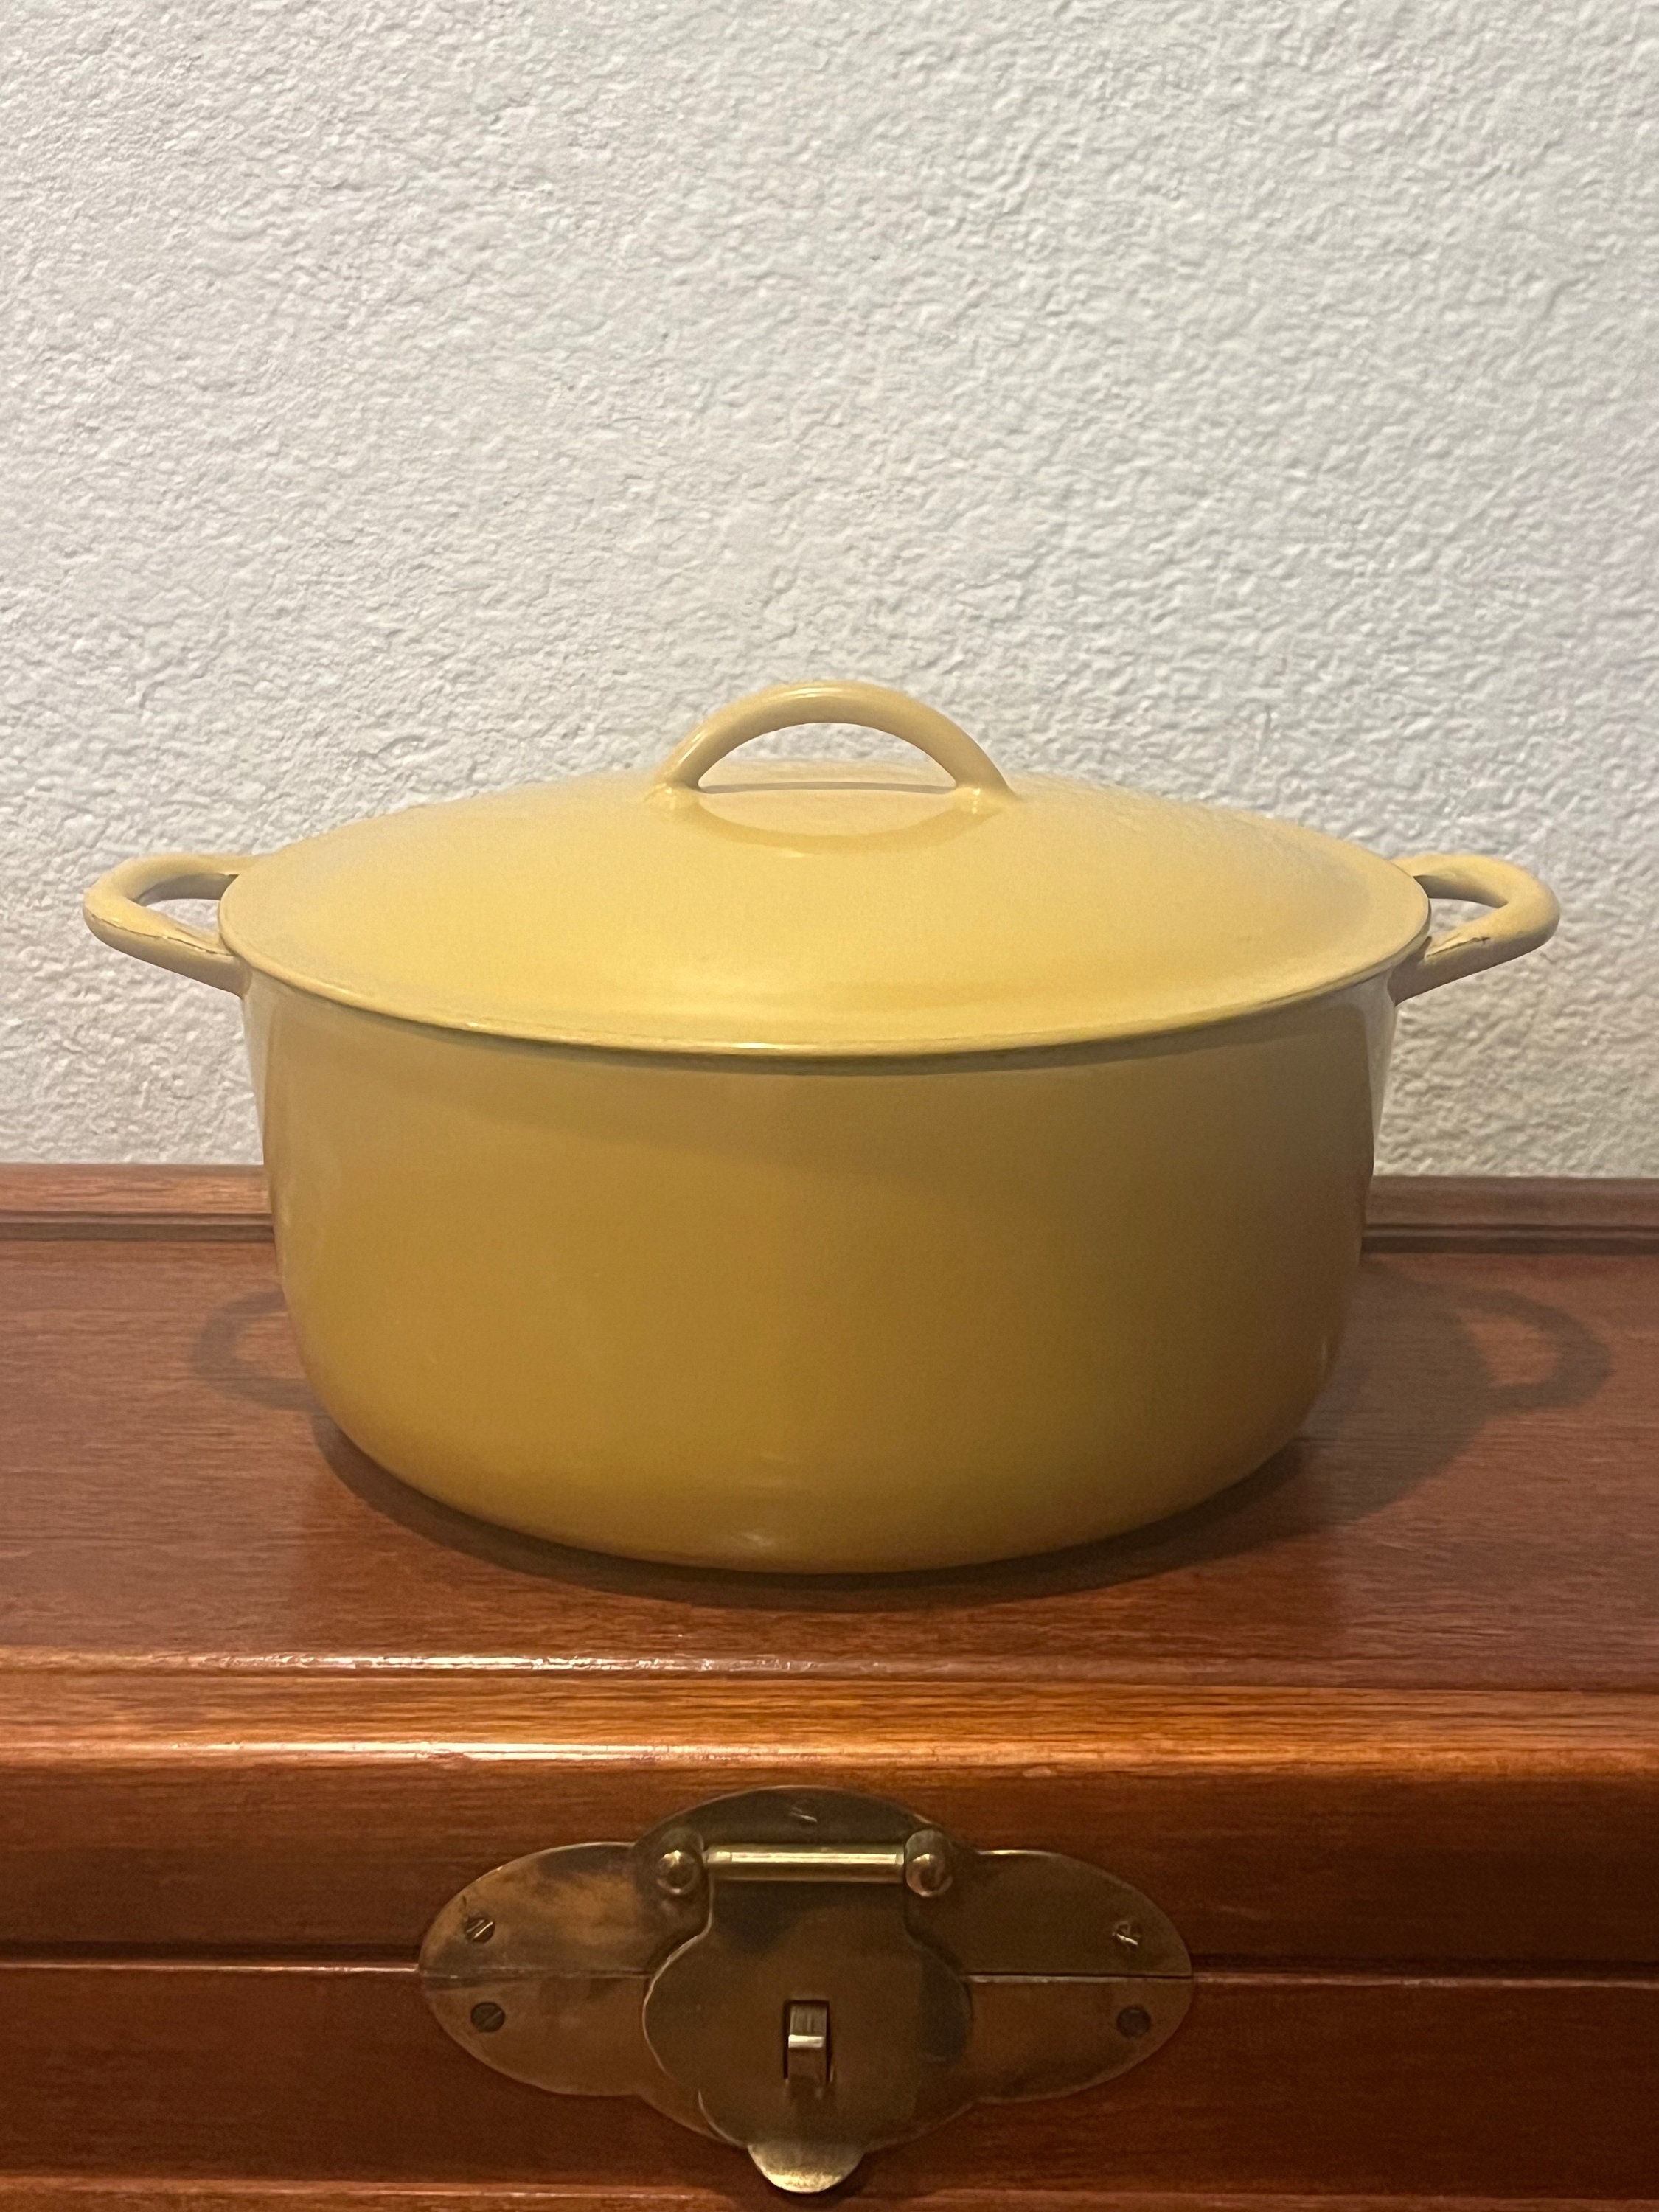 Lodge 16 Cast Iron 12 Quart Dutch Oven, Camp Oven in Excellent Condition,  Manufactured in the 1970's-1980's. 